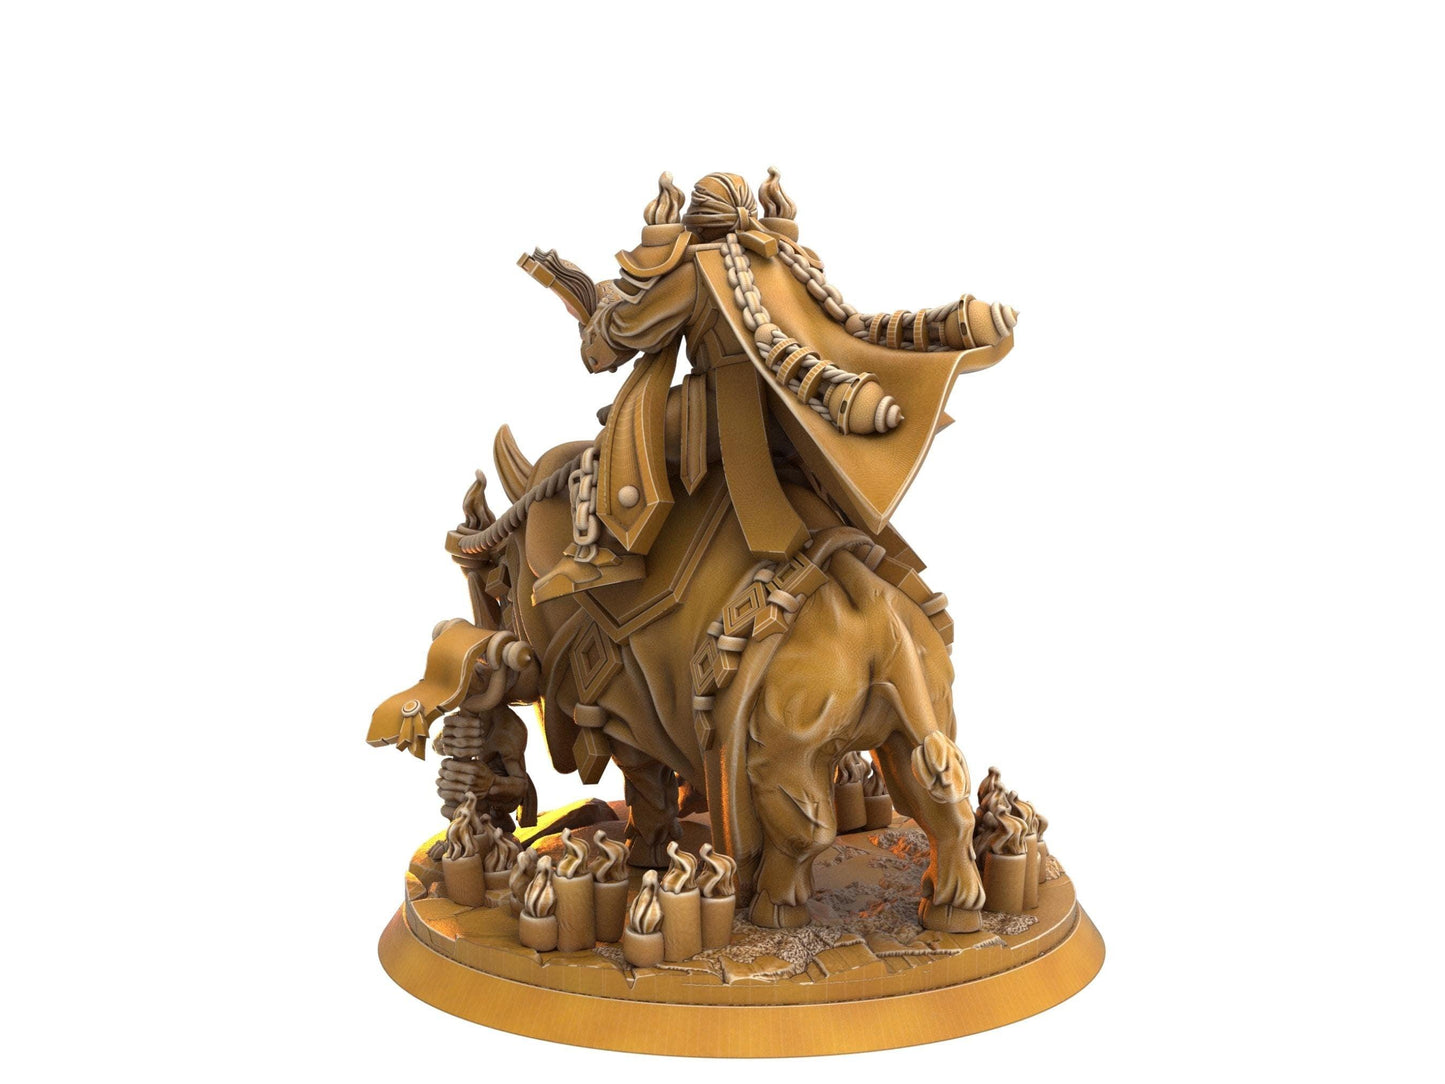 Demon Miniature Hearld of Misery - 32mm scale Tabletop gaming DnD Miniature Dungeons and Dragons, dungeon master - Plague Miniatures shop for DnD Miniatures